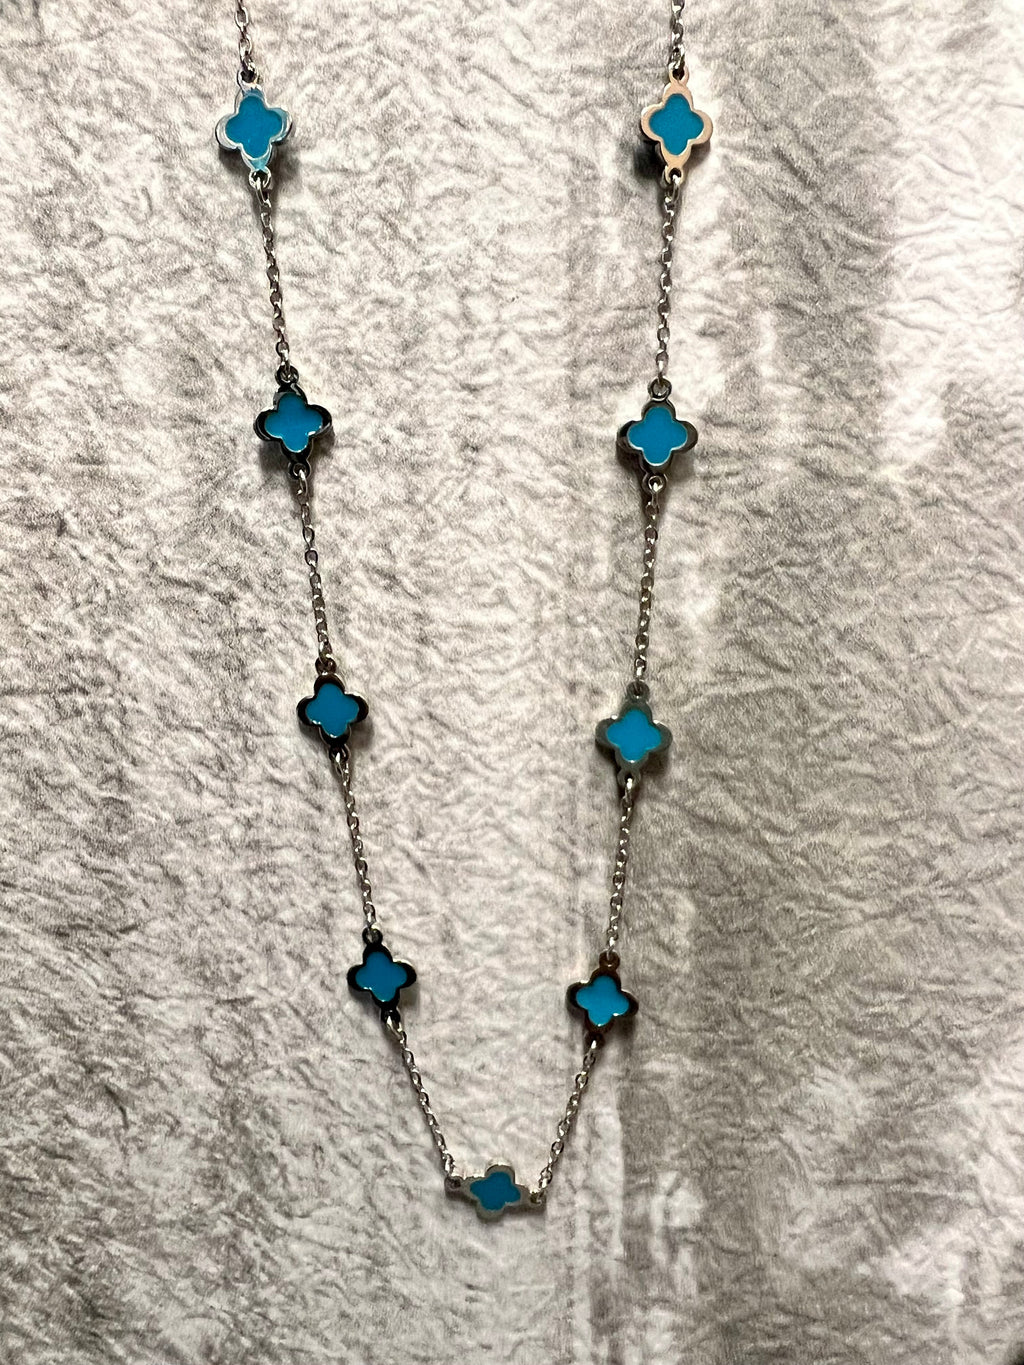 Be a force of nature with this statement piece! This Turquoise and Silver Point Necklace is sure to bring out your inner goddess! 16" of silver chain with a 3" adjustable lobster clasp, featuring a turquoise epoxy cross design -- you can't go wrong with this one-of-a-kind look!